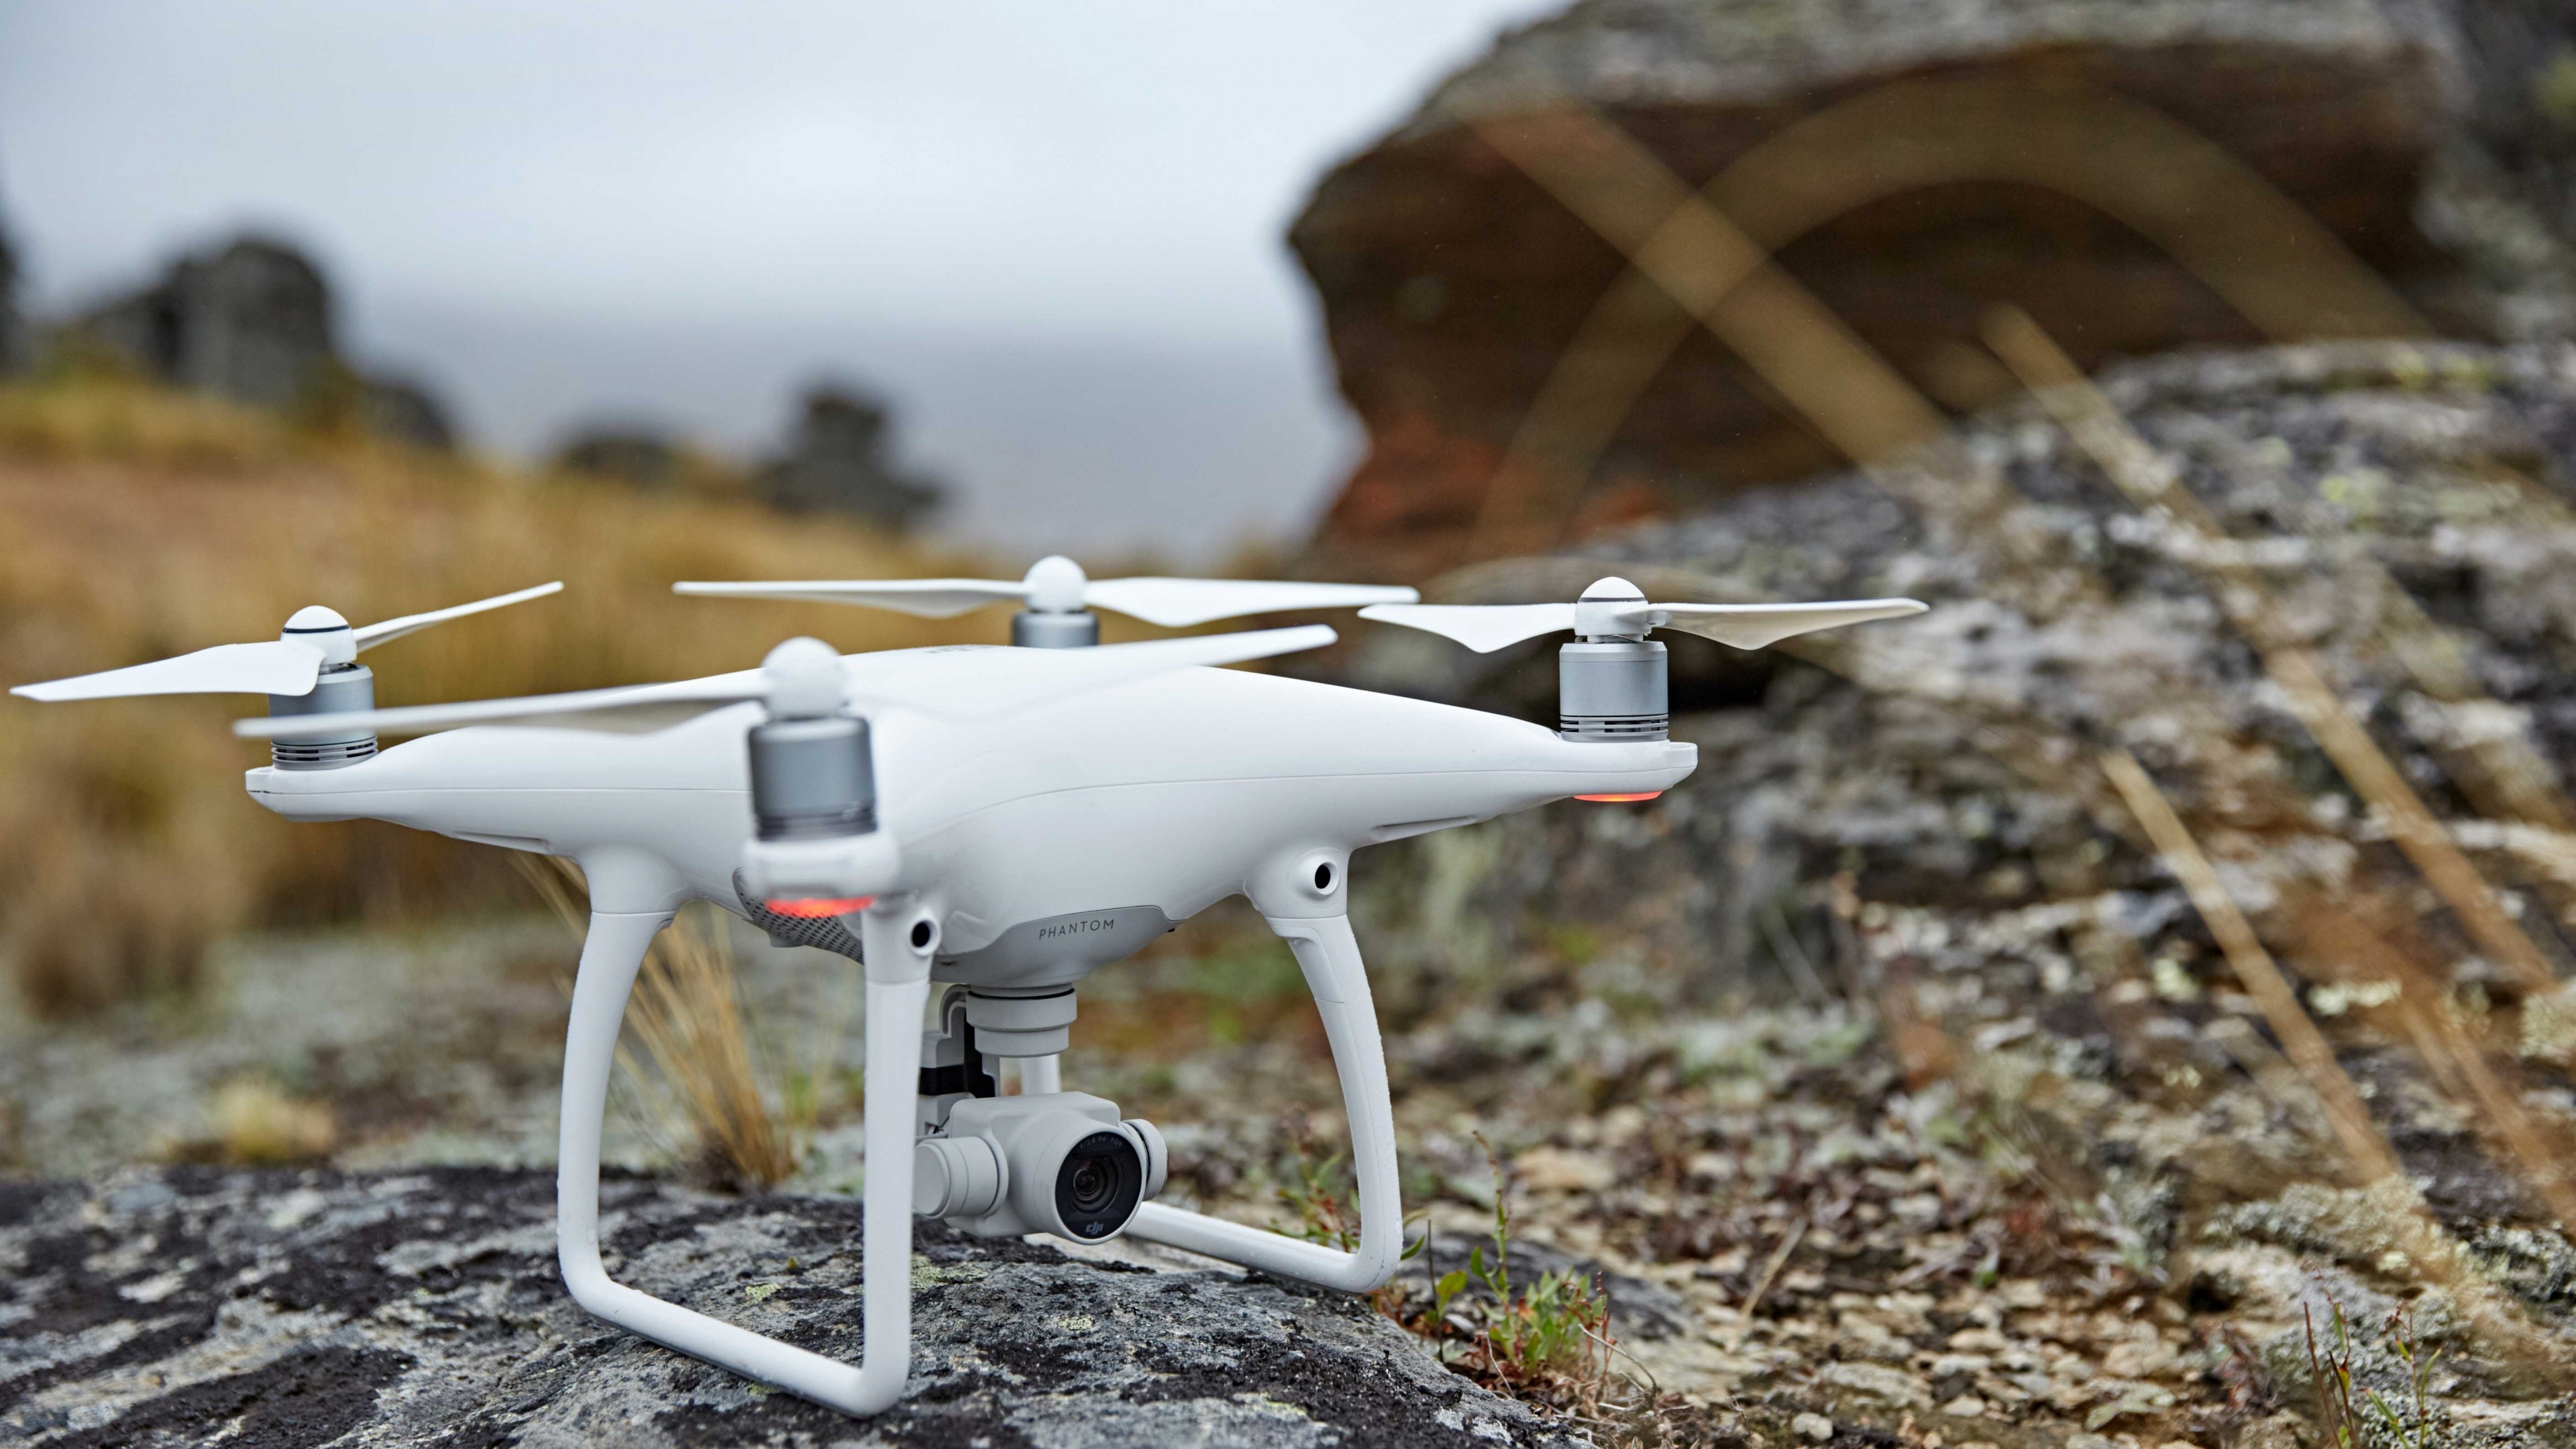 Drone: DJI Phantom 4 pro, Quadcopter, An aircraft guided by remote control. 3840x2160 4K Background.